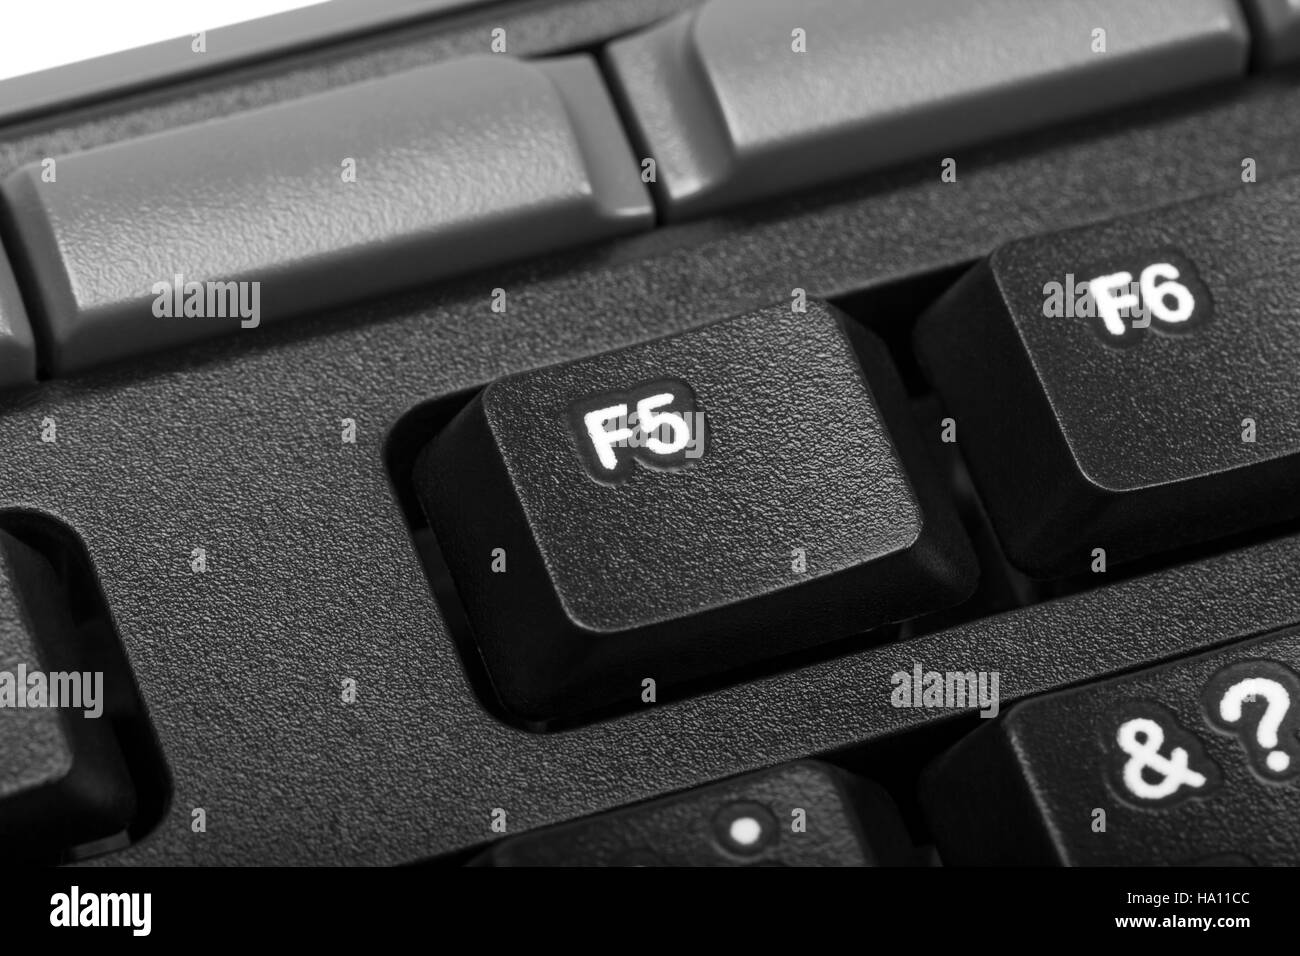 Electronic collection - detail black computer keyboard with key f5 Stock Photo